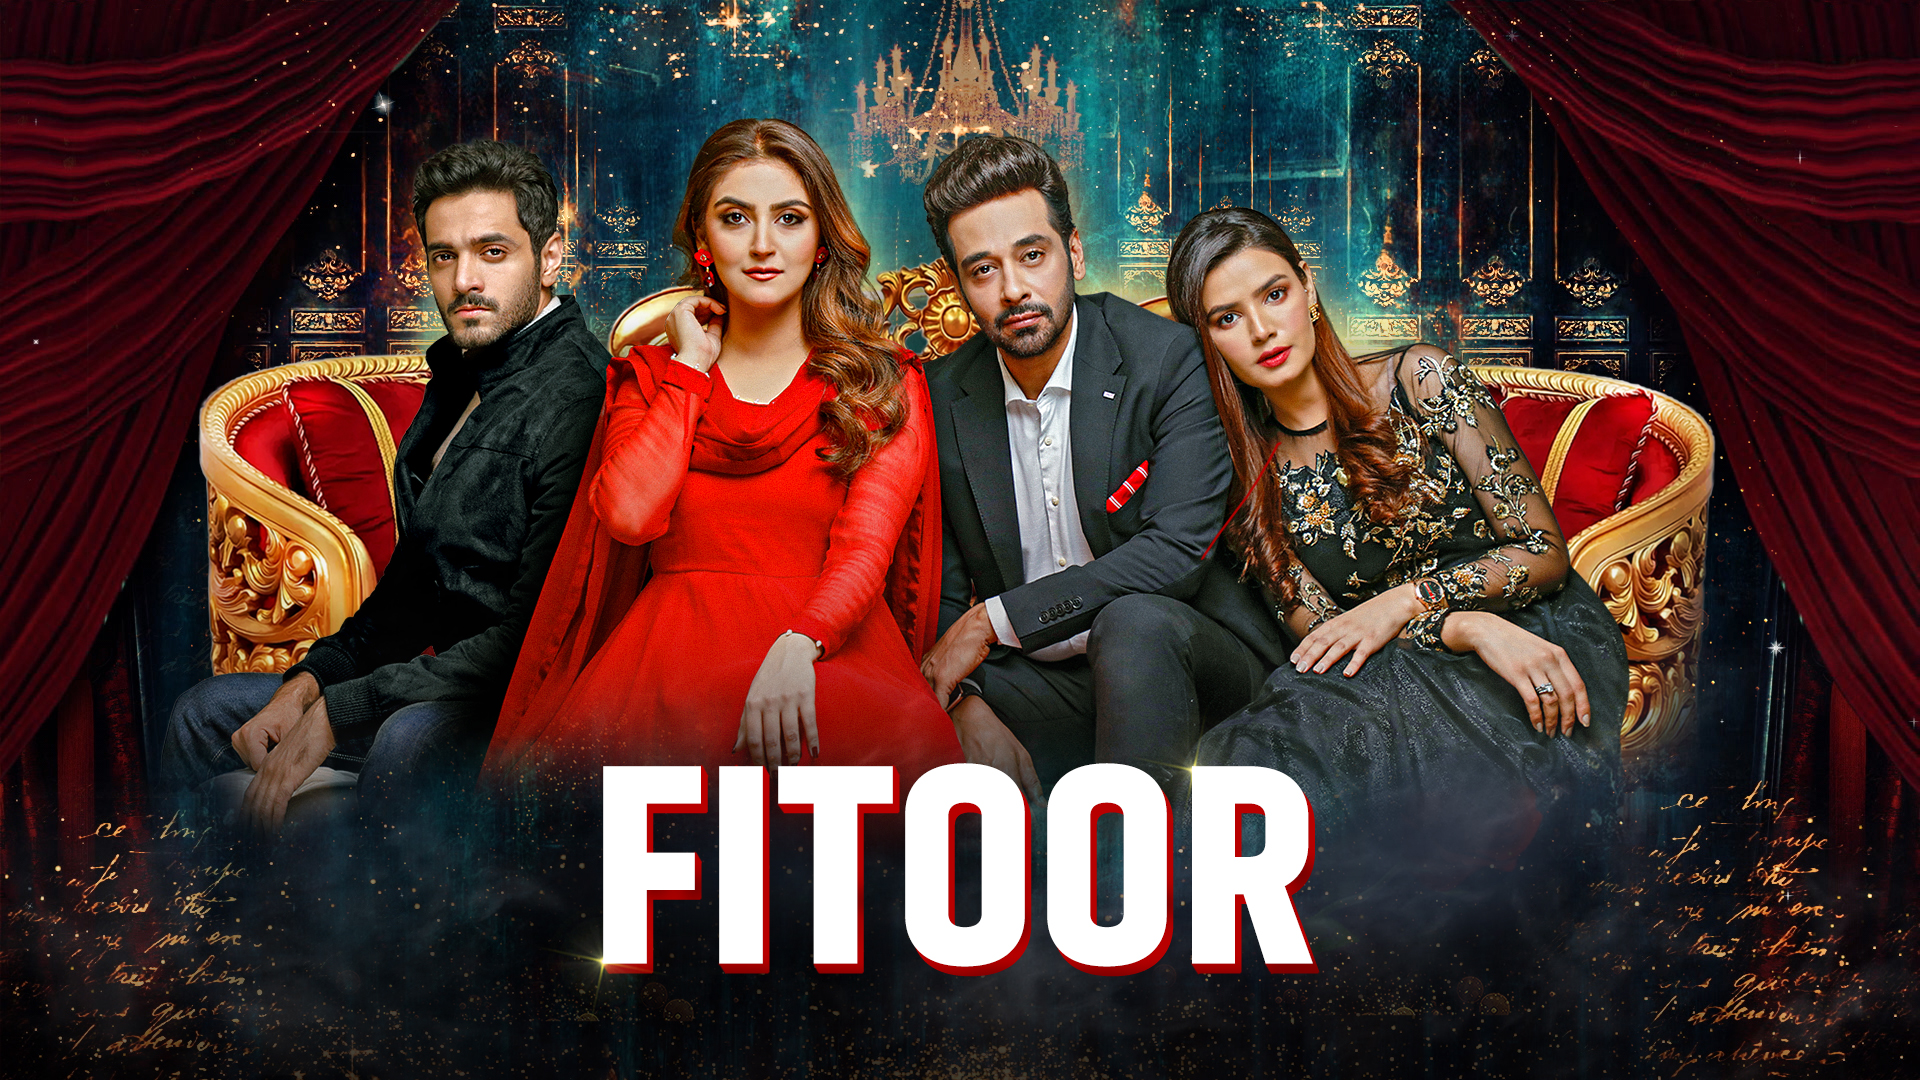 Fitoor is a Pakistani drama serial presented by Har Pal Geo. Fitoor narrates the story of four people whose future is connected by their past. It is a love story that transcends above all, as a person in love is bound to forget about the worries of the past and the uncertainty of the future. Here We Present Pakistani Drama Fitoor Cast, Story, and Release Date.